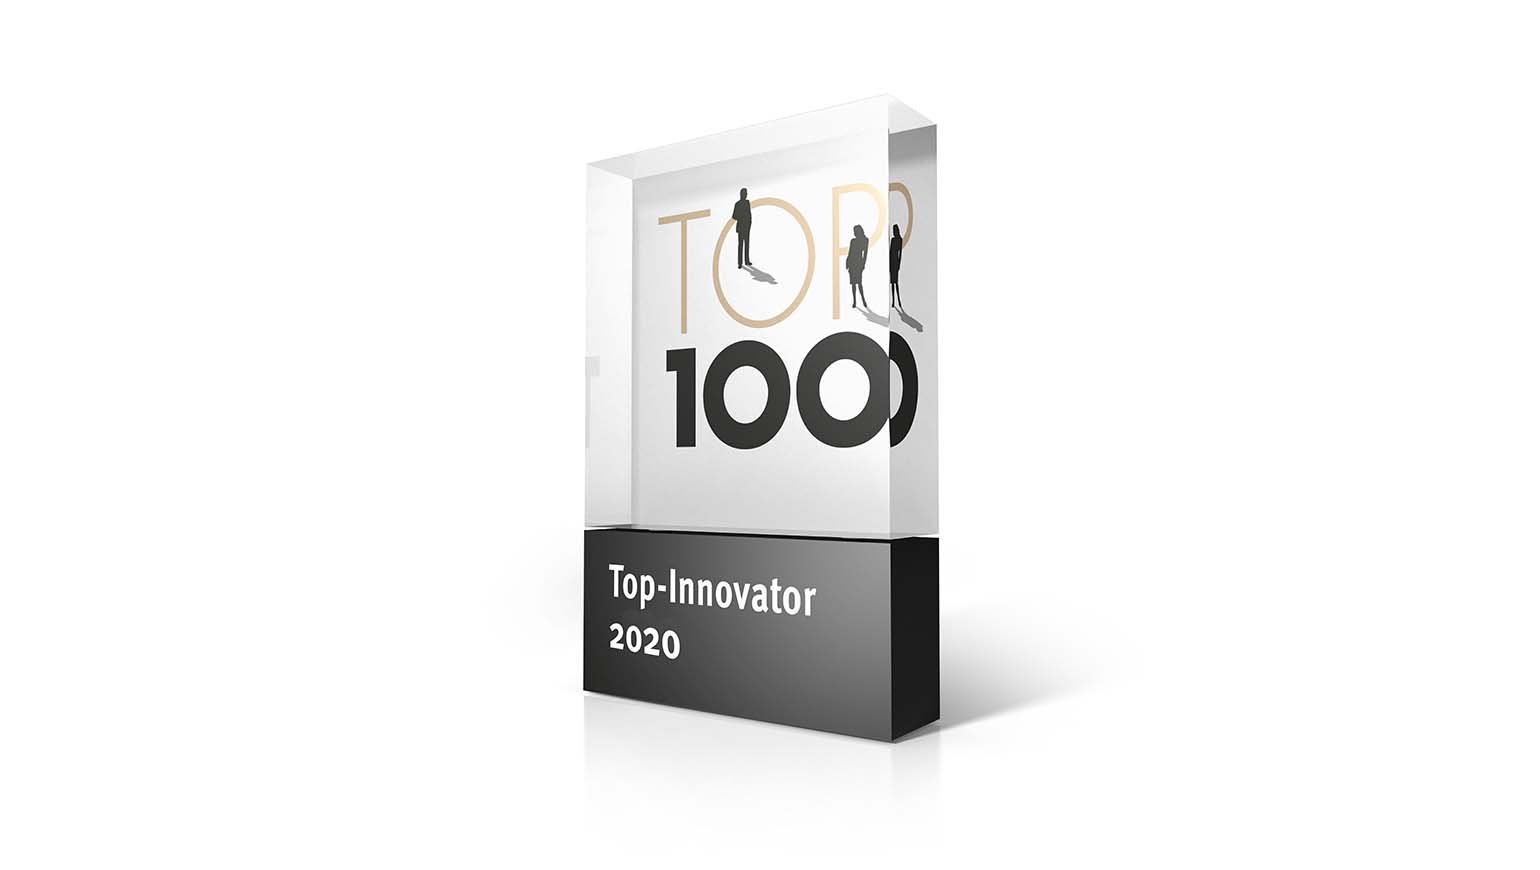 Digital Innovation Makes a Difference - Contentserv Recognized as Top Innovator 2020